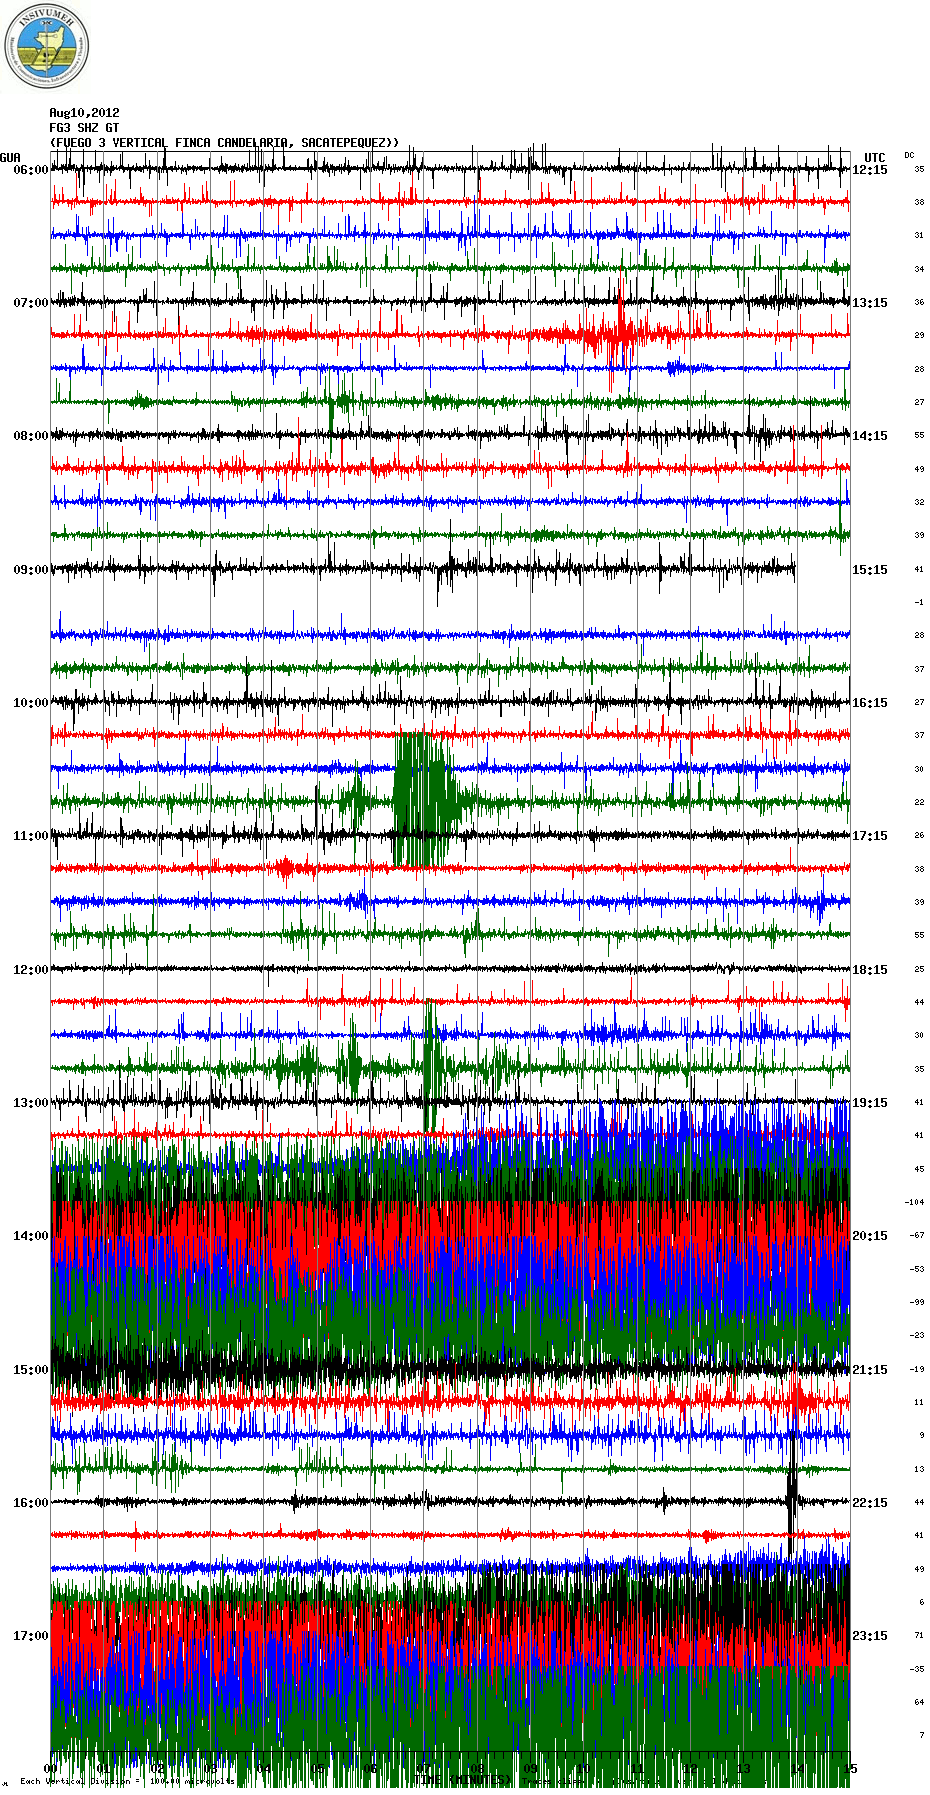 Seismic recording from Fuego (10 Aug) showing pulses of strong activity, probably rock avalanches